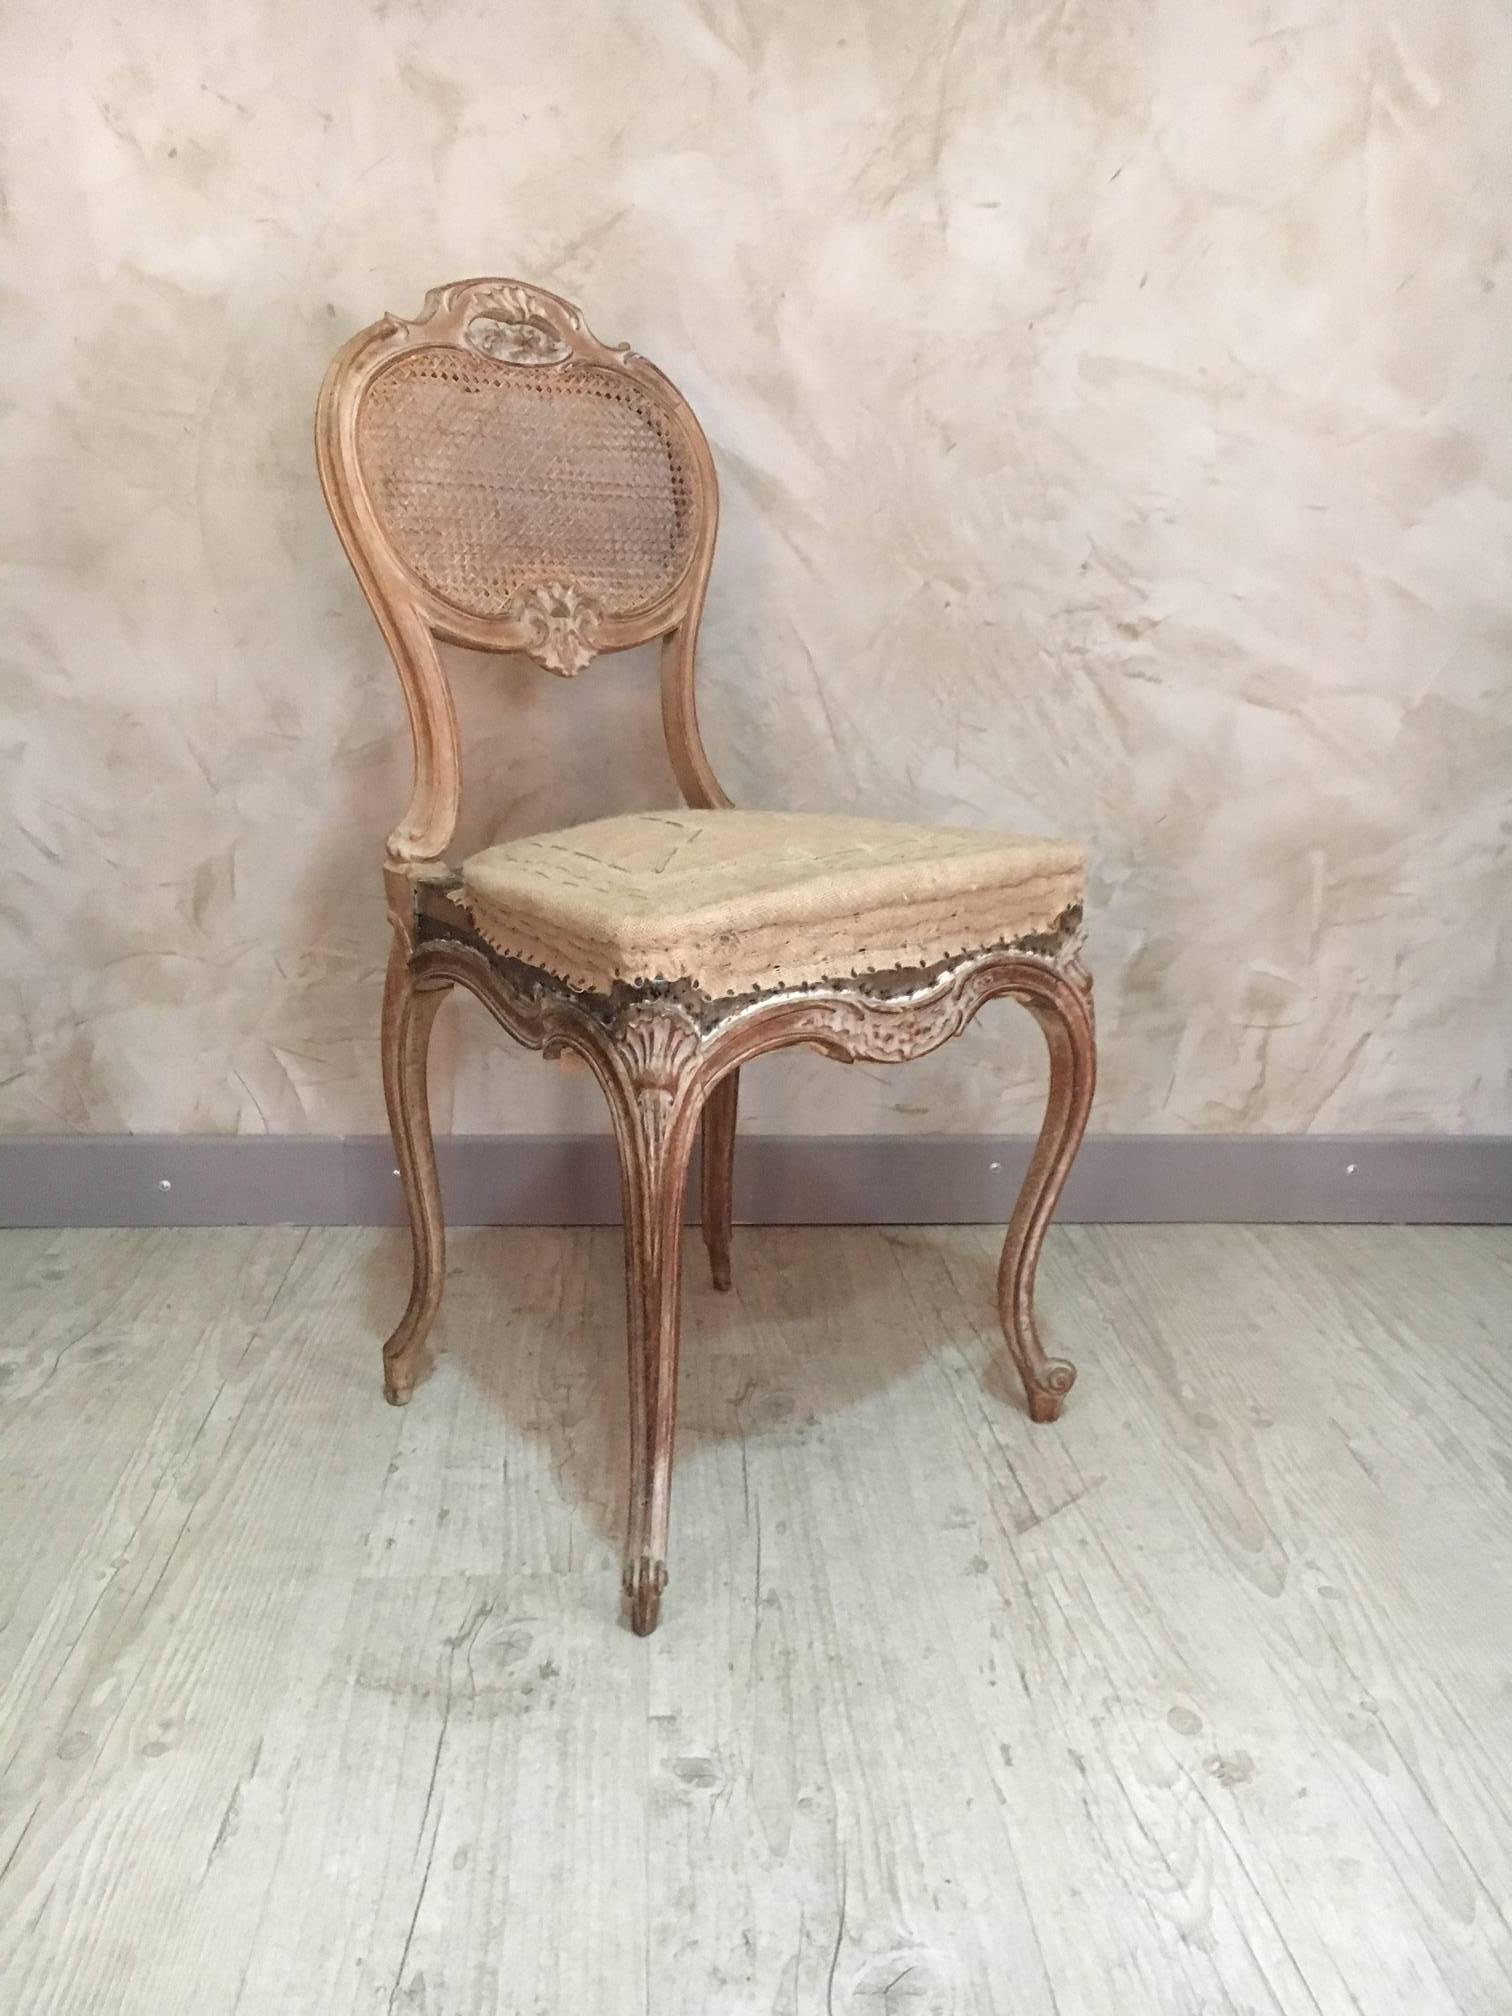 Louis XV style Cane chair entirely restored in the traditional way. The chair is cane on the back and the seating has been totally restored with horsehairs.
We decided to not put a fabric, because we wanted to let the customer choose his own fabric